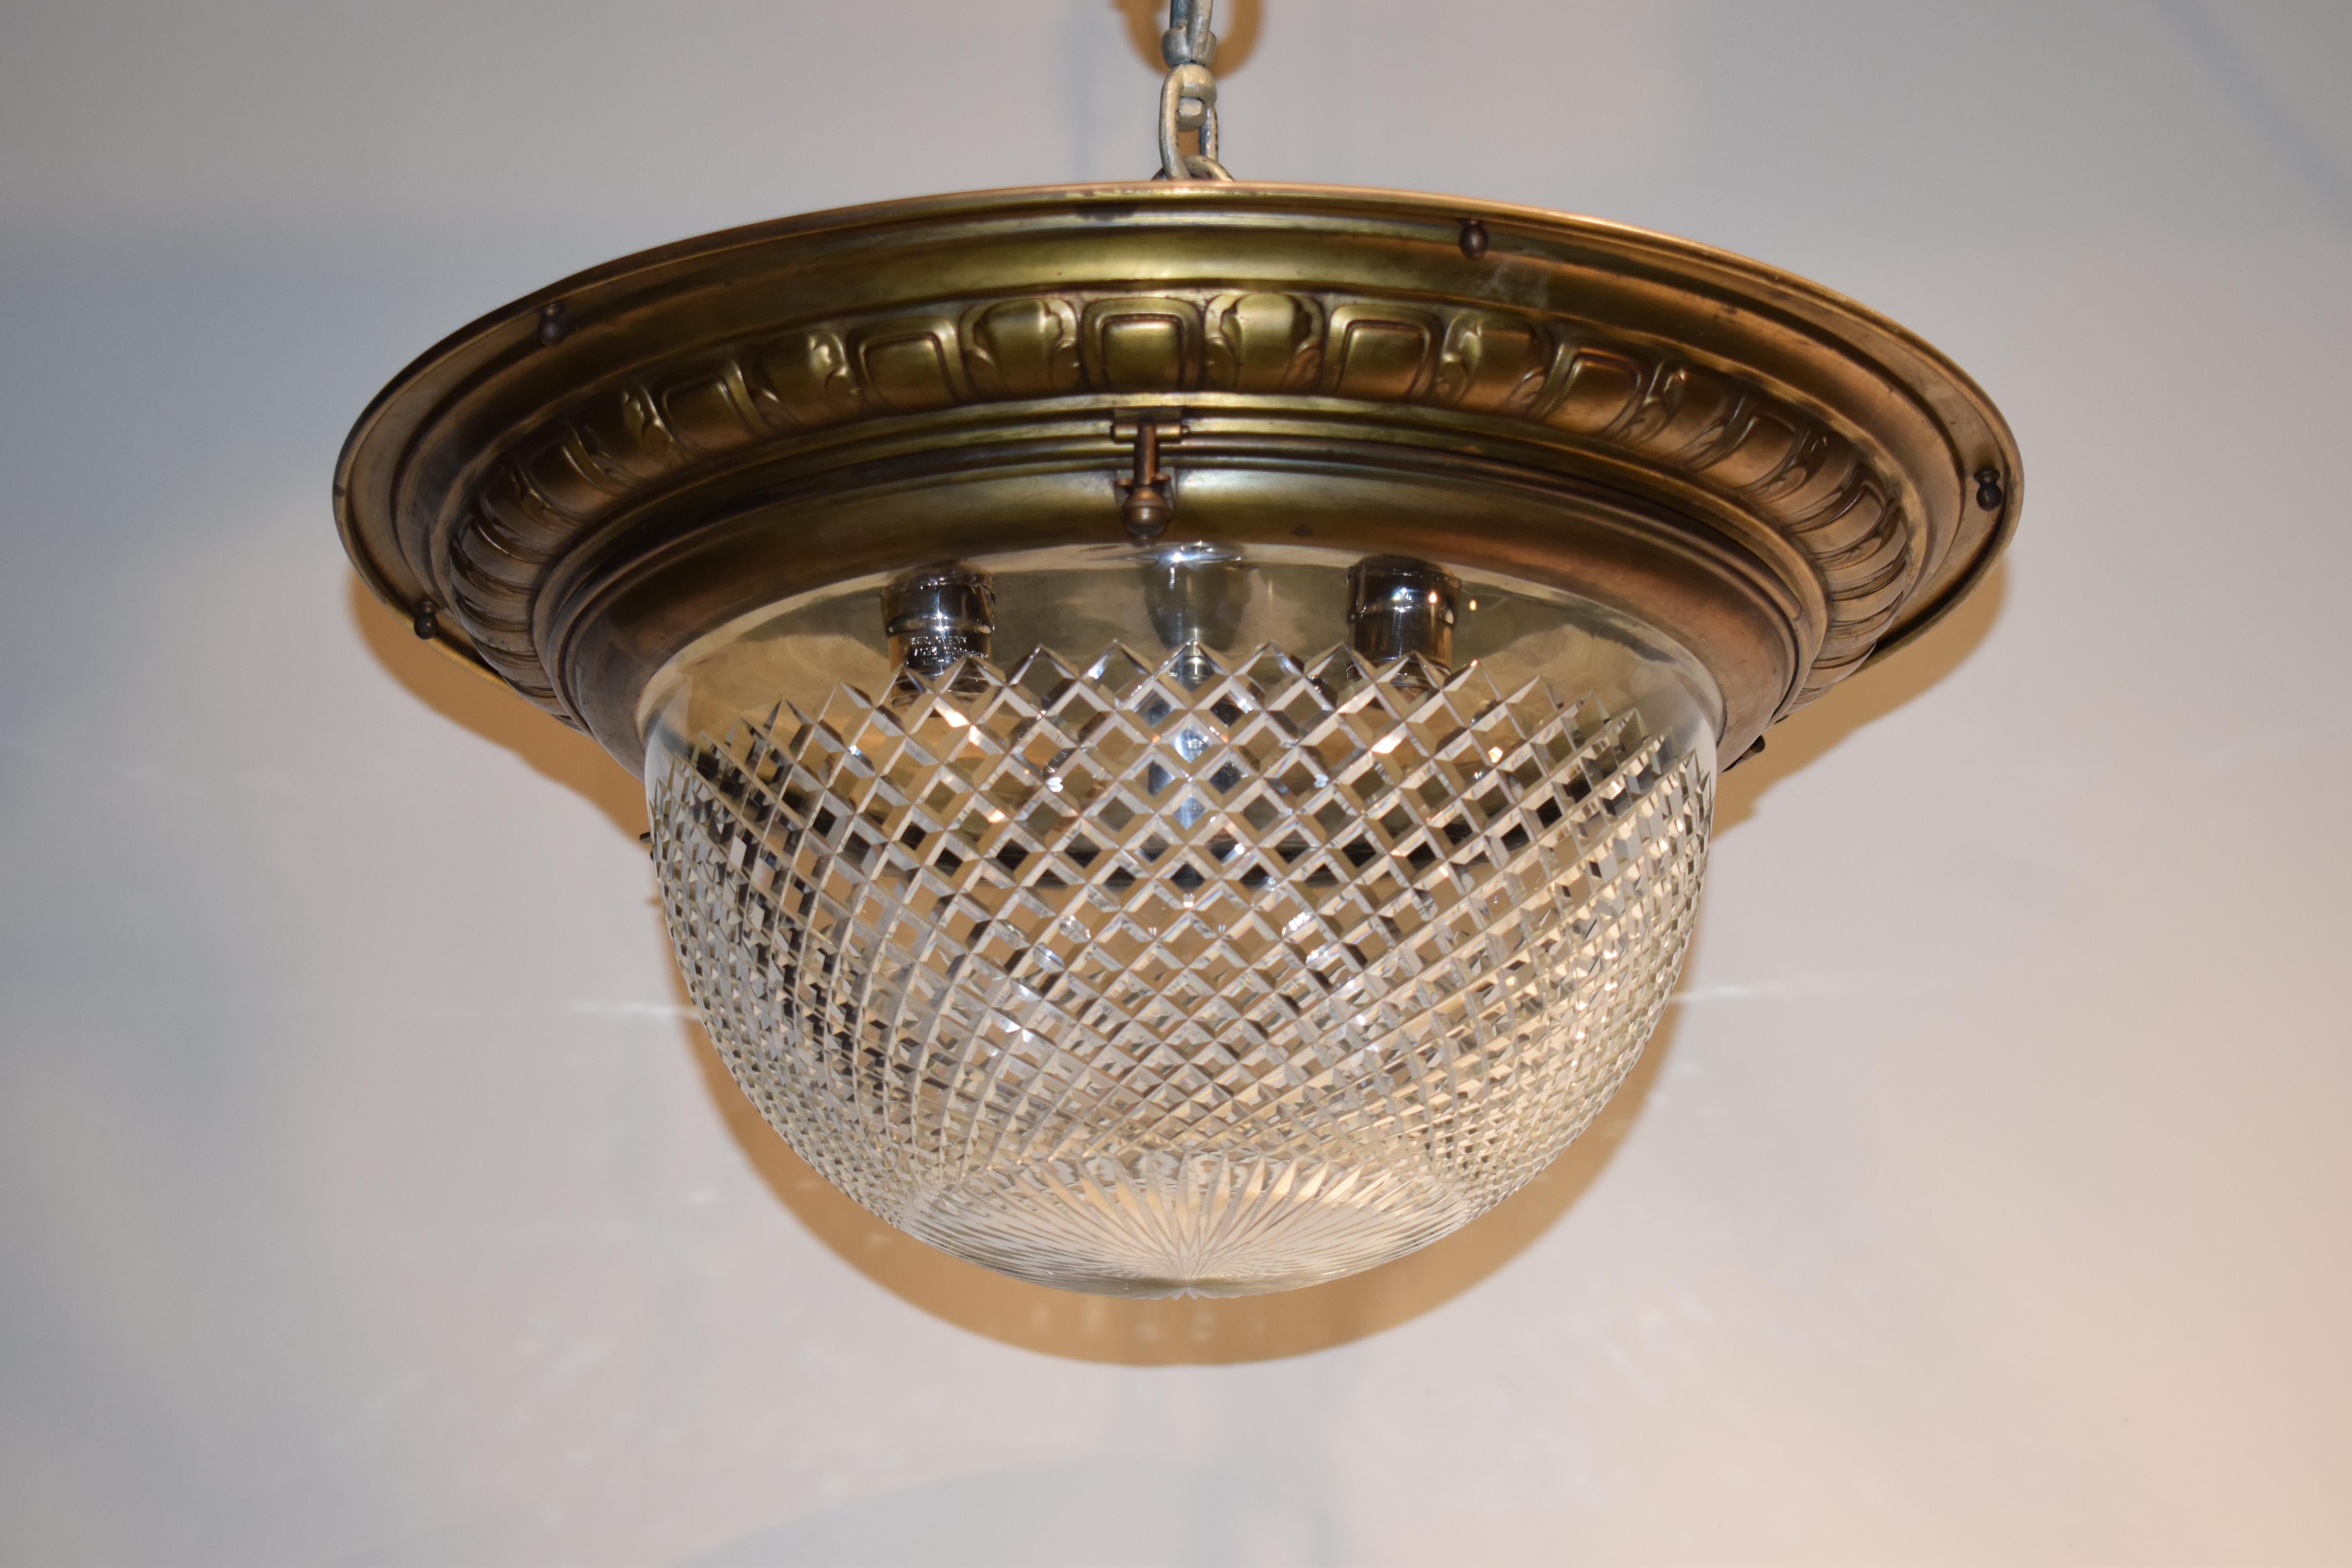 A very fine Gilt bronze plafonnier. The crown supporting a hand cut crystal dome by Baccarat. France, circa 1900. 3 lights.
Measures: Height 11